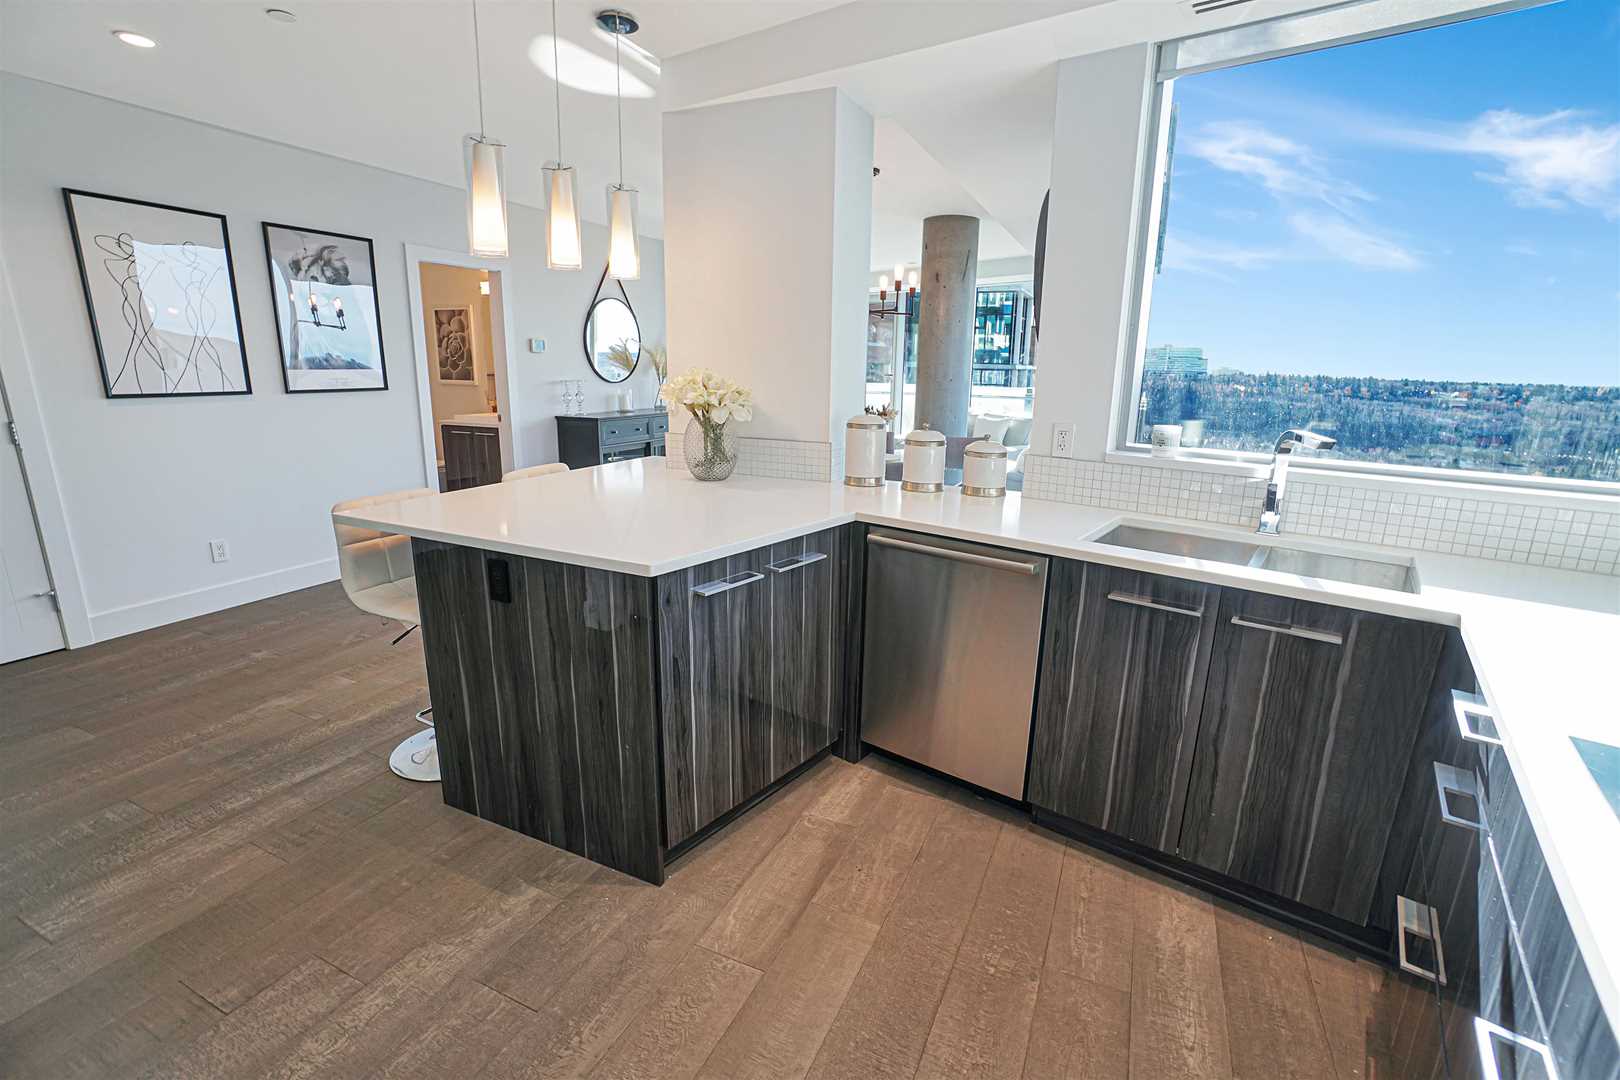 Interior condo kitchen, light hardwood floor, dark wood cabinets, white counters, ceiling and walls; large window by sink